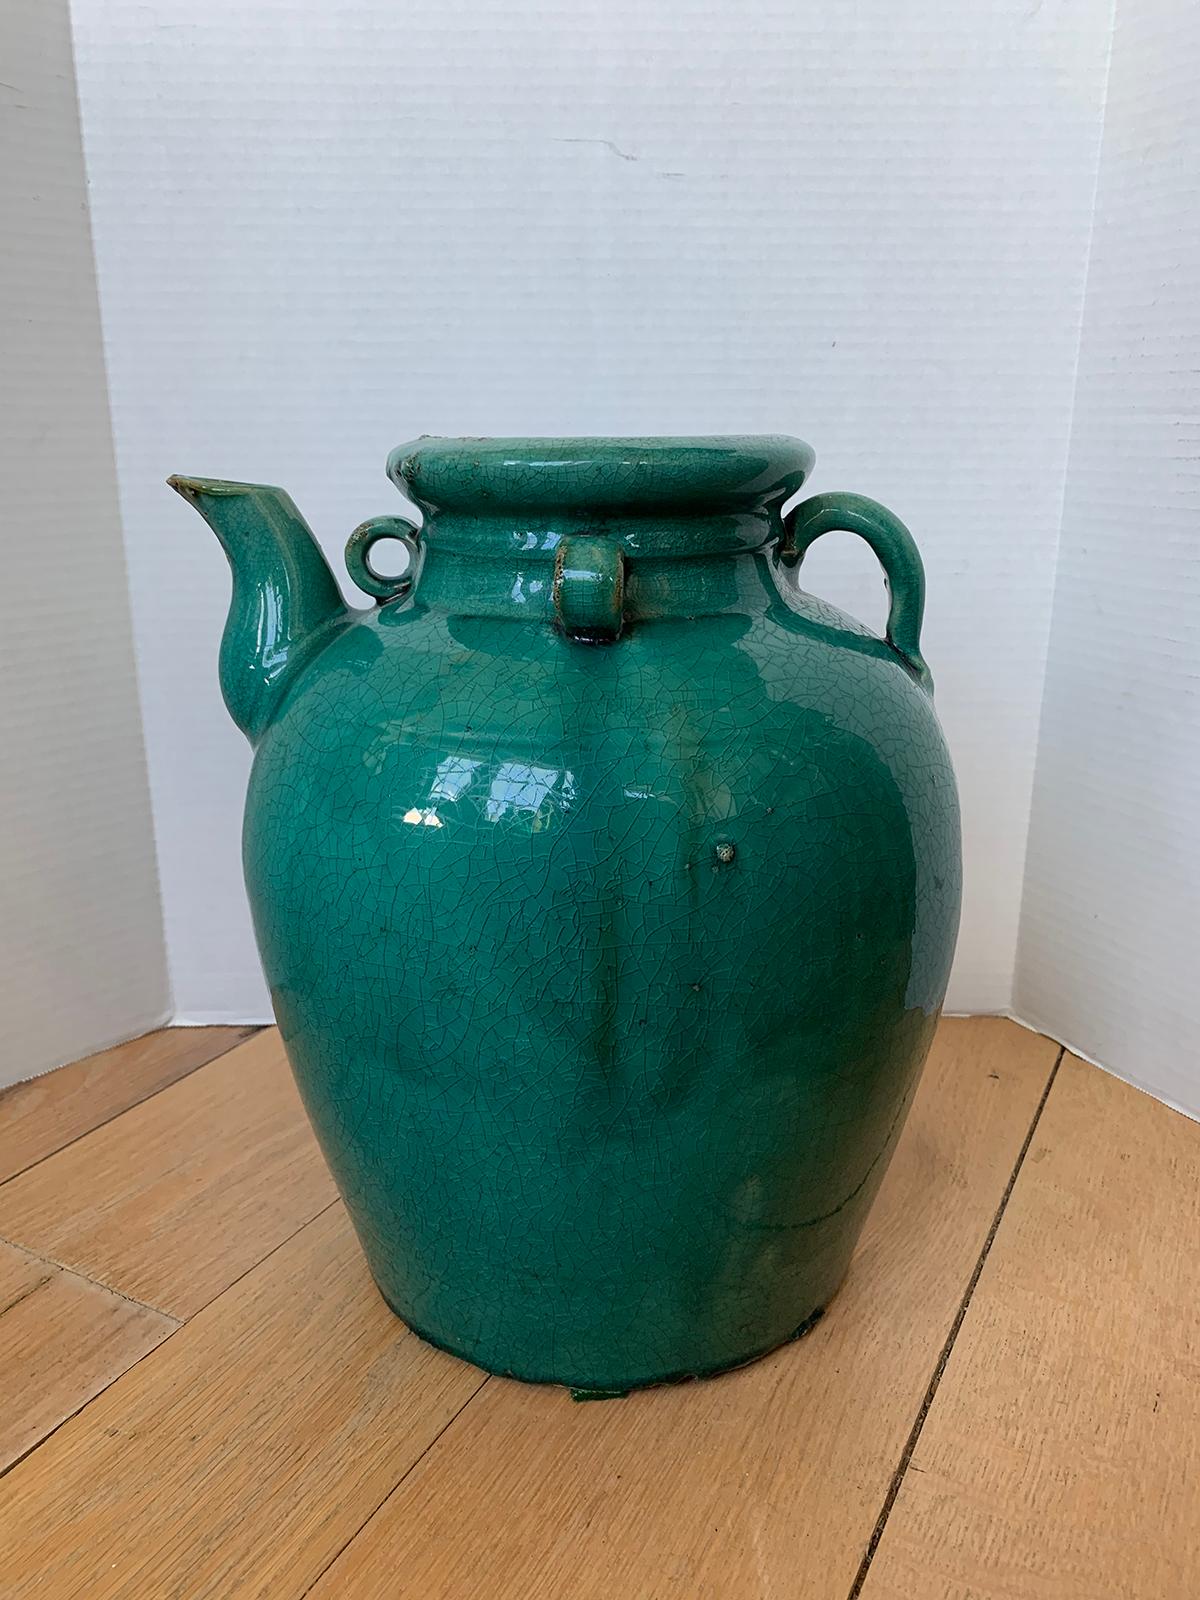 photo of turquoise glaze on pottery from 100-200 ad